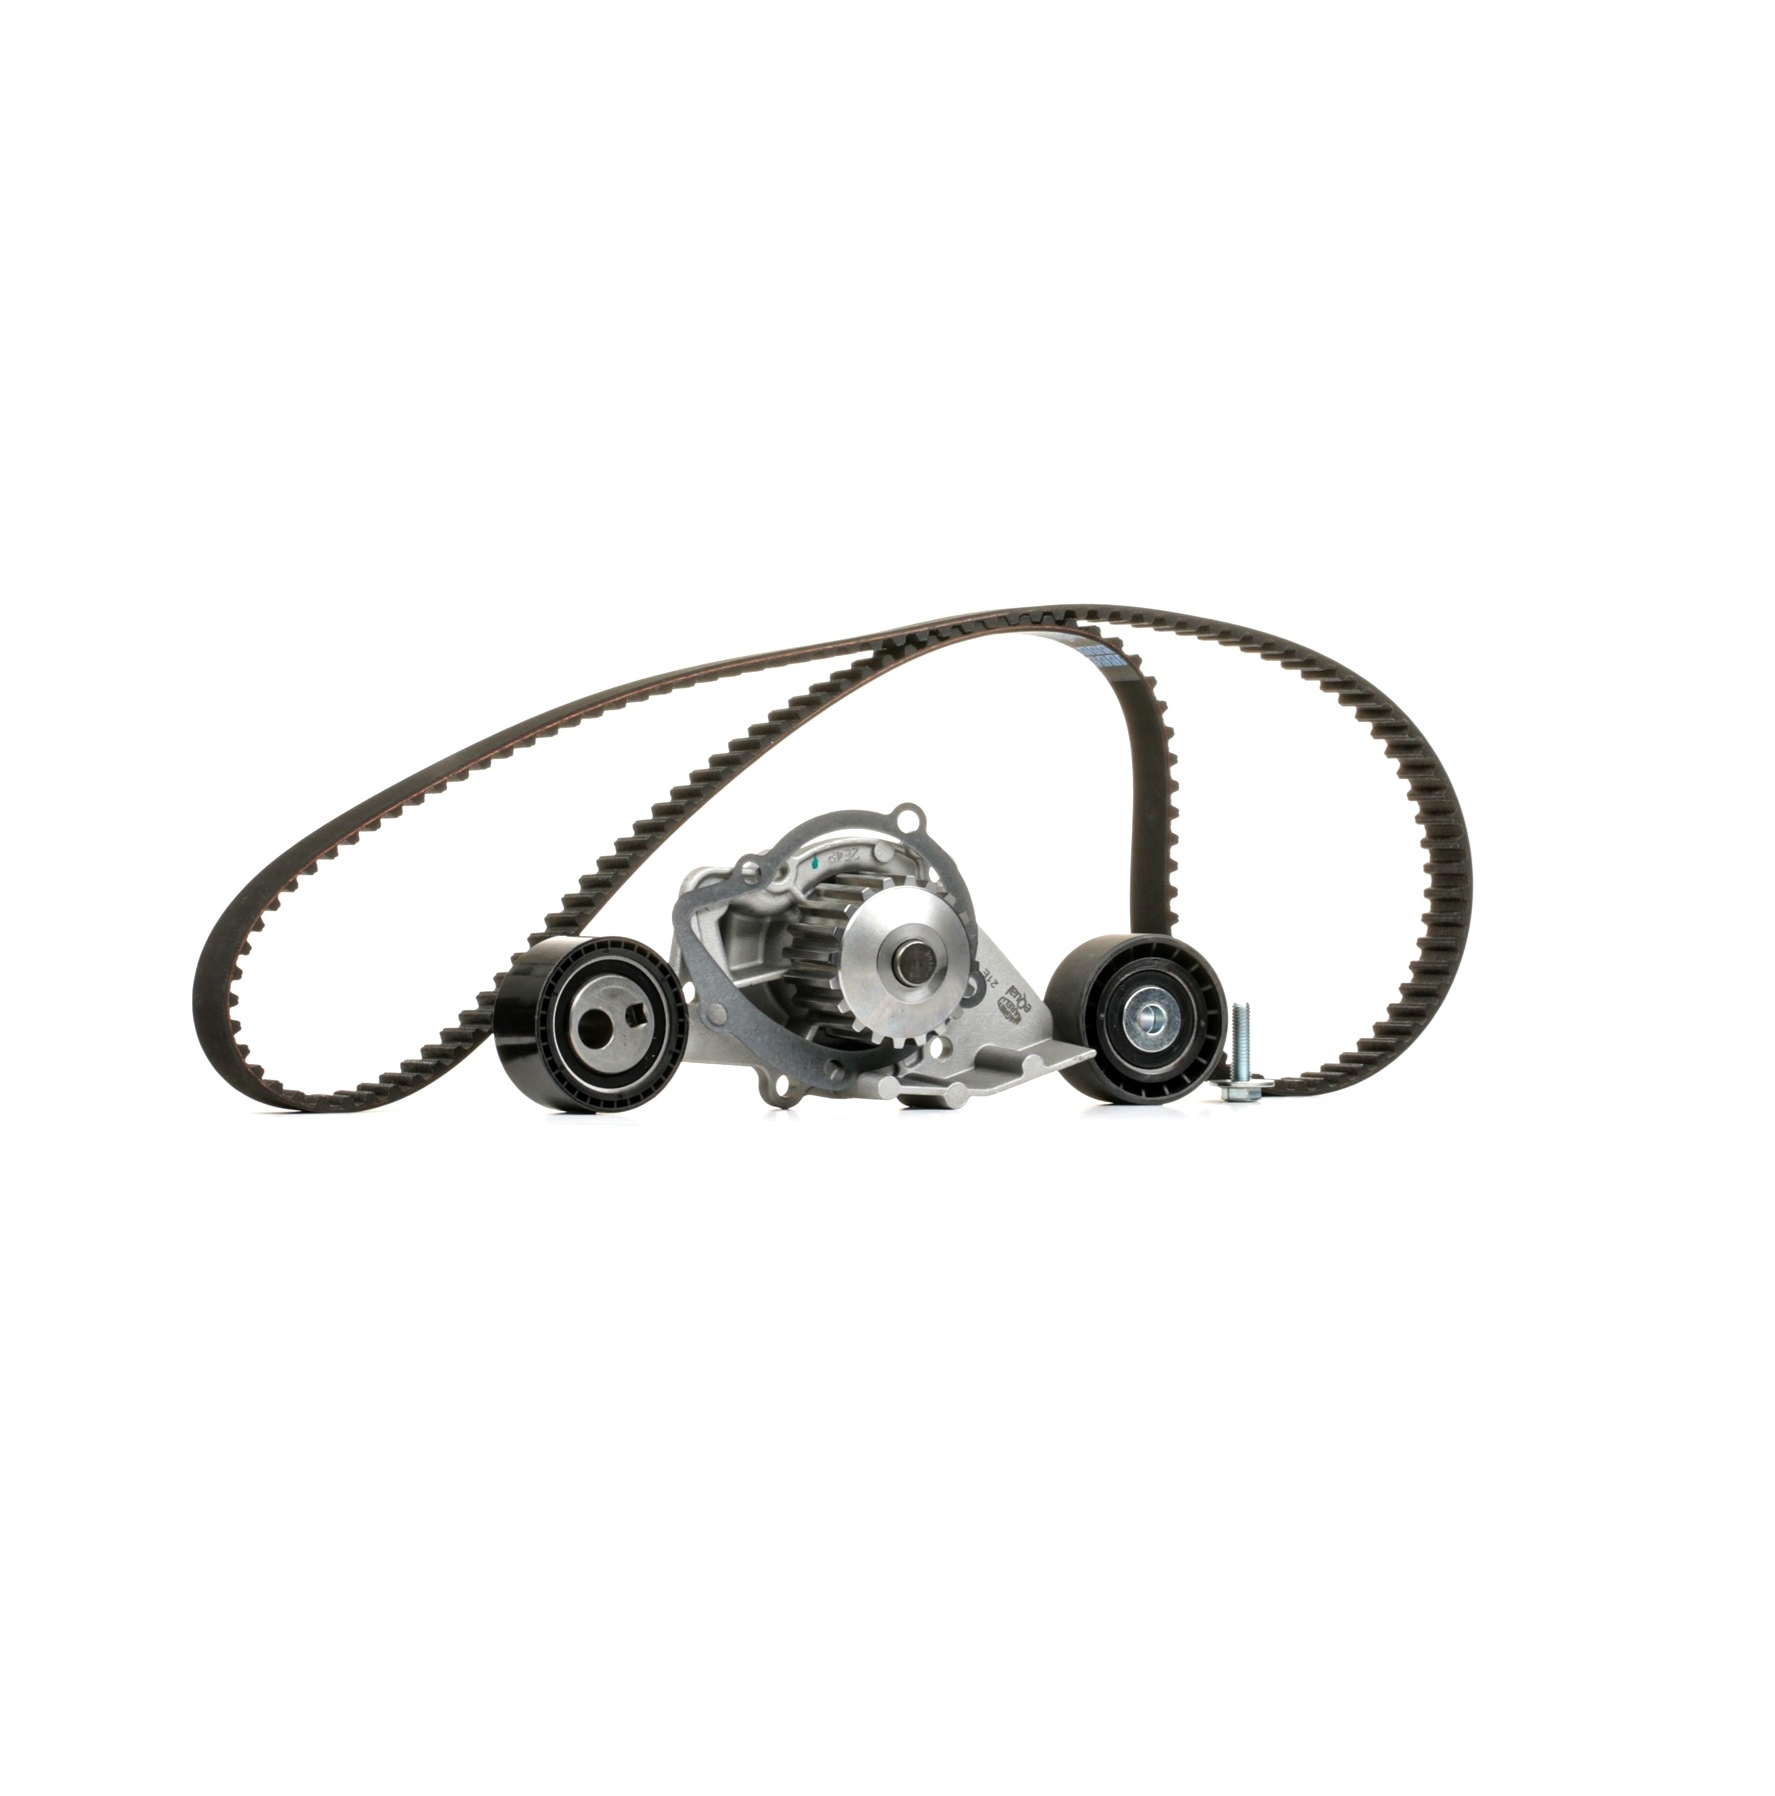 MAGNETI MARELLI 132011160040 Water pump and timing belt kit Number of Teeth: 141 L: 1343 mm, Width: 25,4 mm